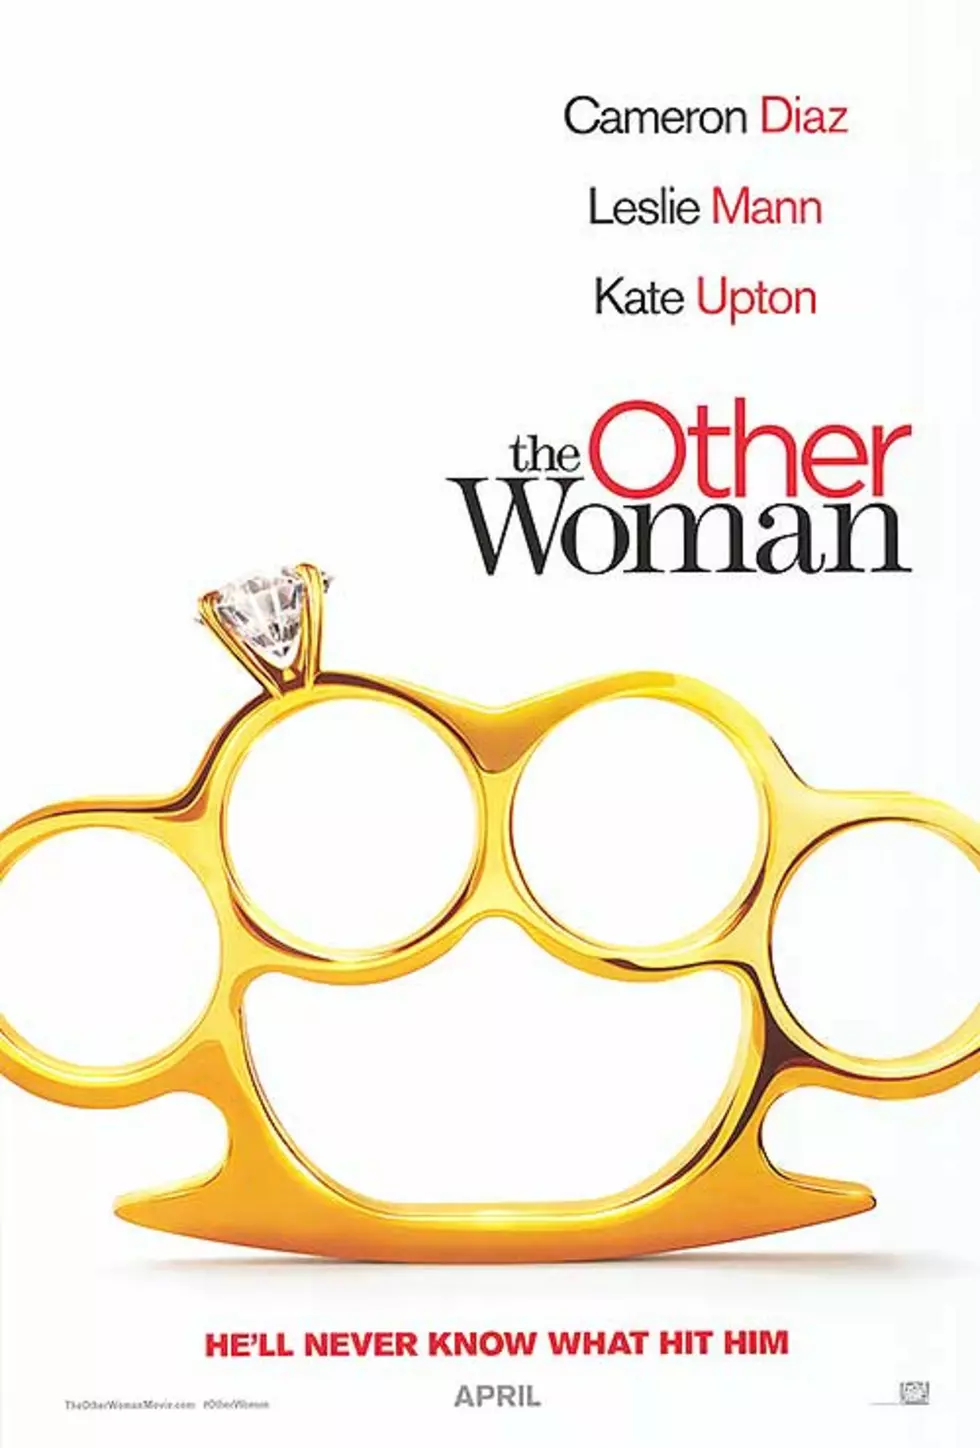 Kelly Bennis Pulls No Punches With &#8216;The Other Woman&#8217; [Audio, Video]